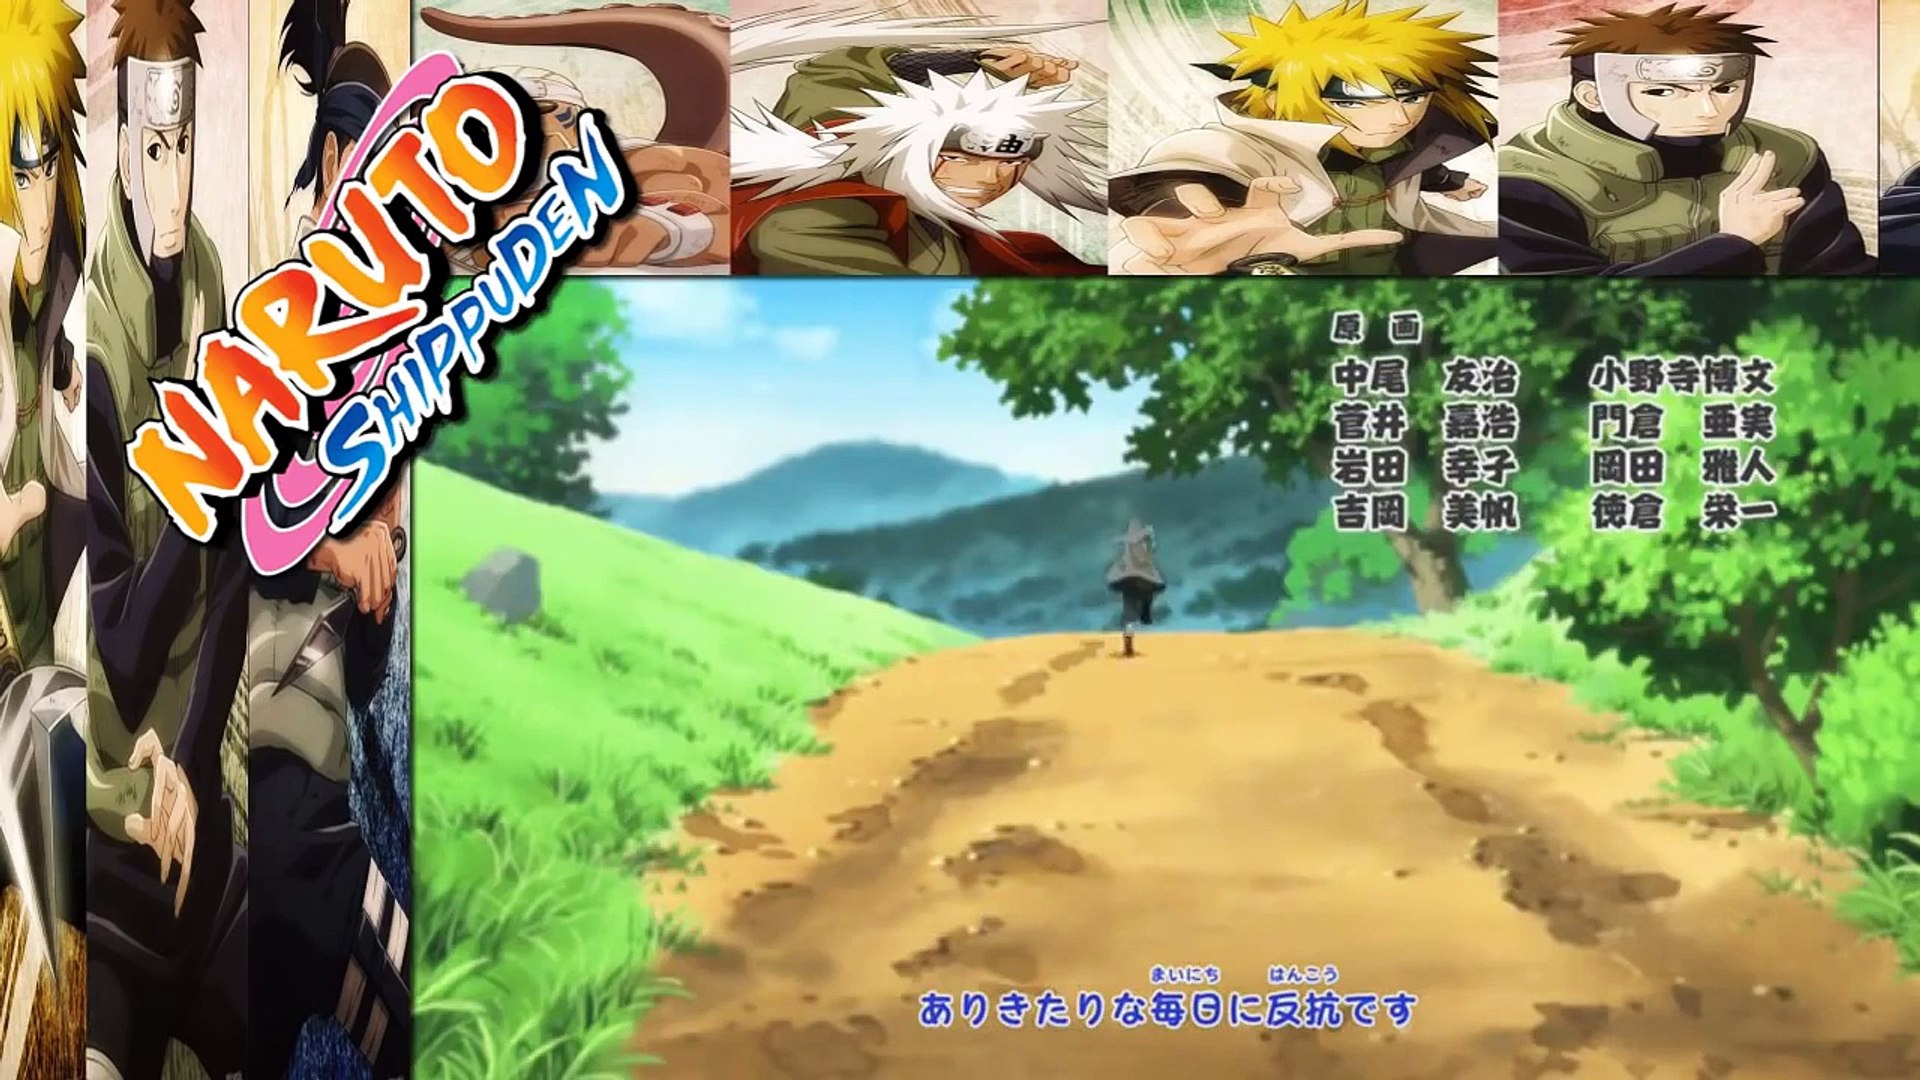 Naruto Shippuden ending/Outro 25 (episode 307) I Can Hear by DISH - video  Dailymotion